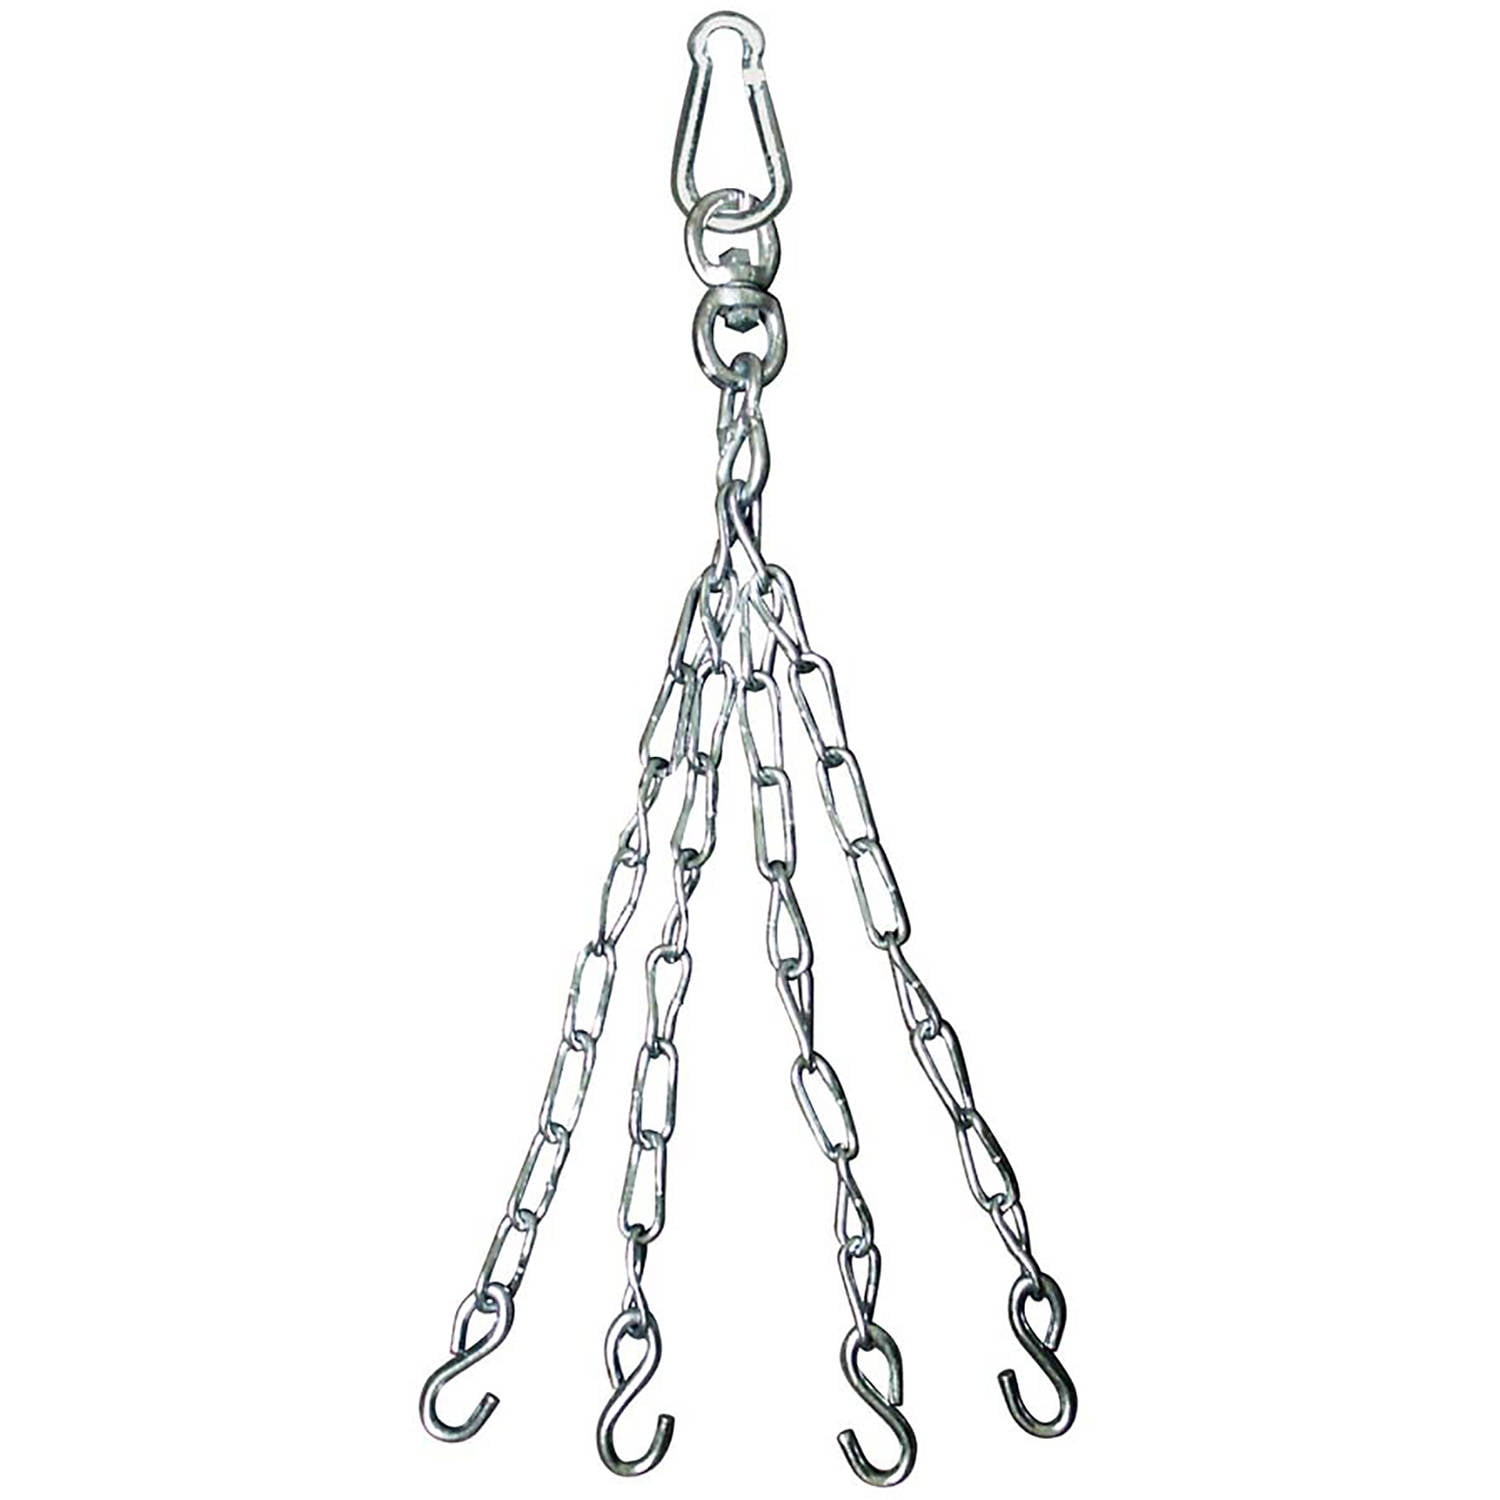 Details about   ADii™ Heavy Duty MMA Boxing Heavy Bag Chain Punching Bag Hanger Chain and Swivel 